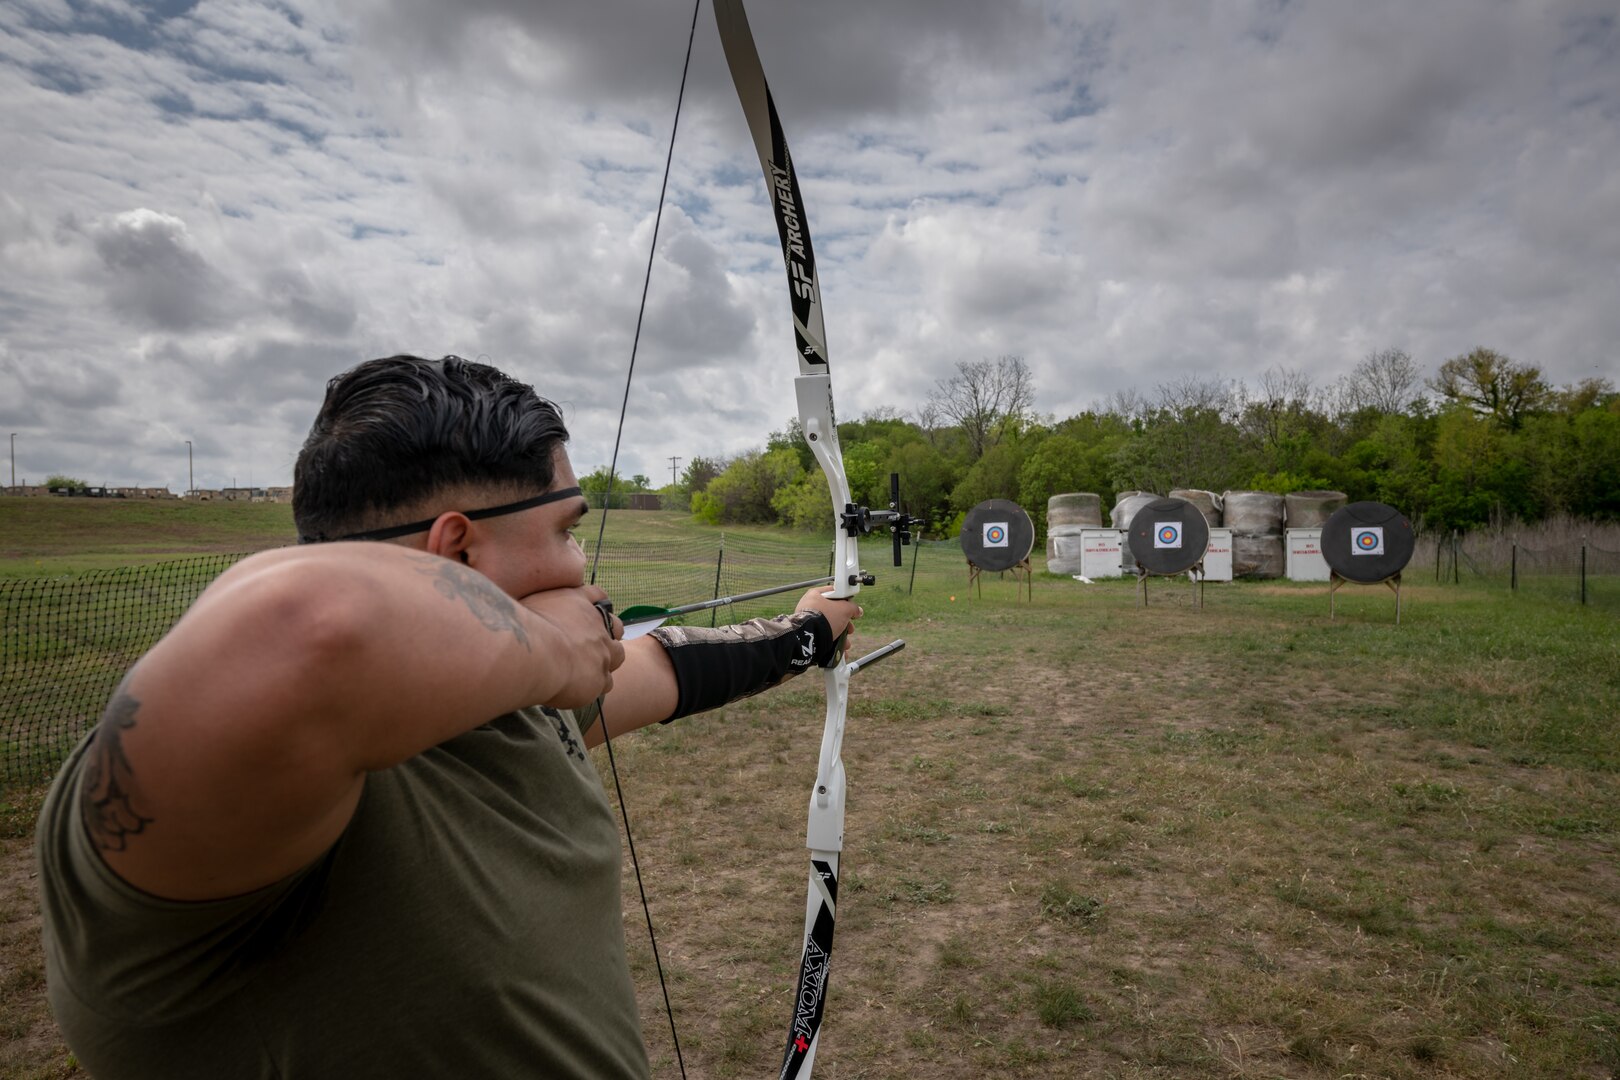 U.S. Marine Cpl. Joseph Quintanilla shoots his bow as part of the Wounded Warrior archery competition practice and bow fitting.